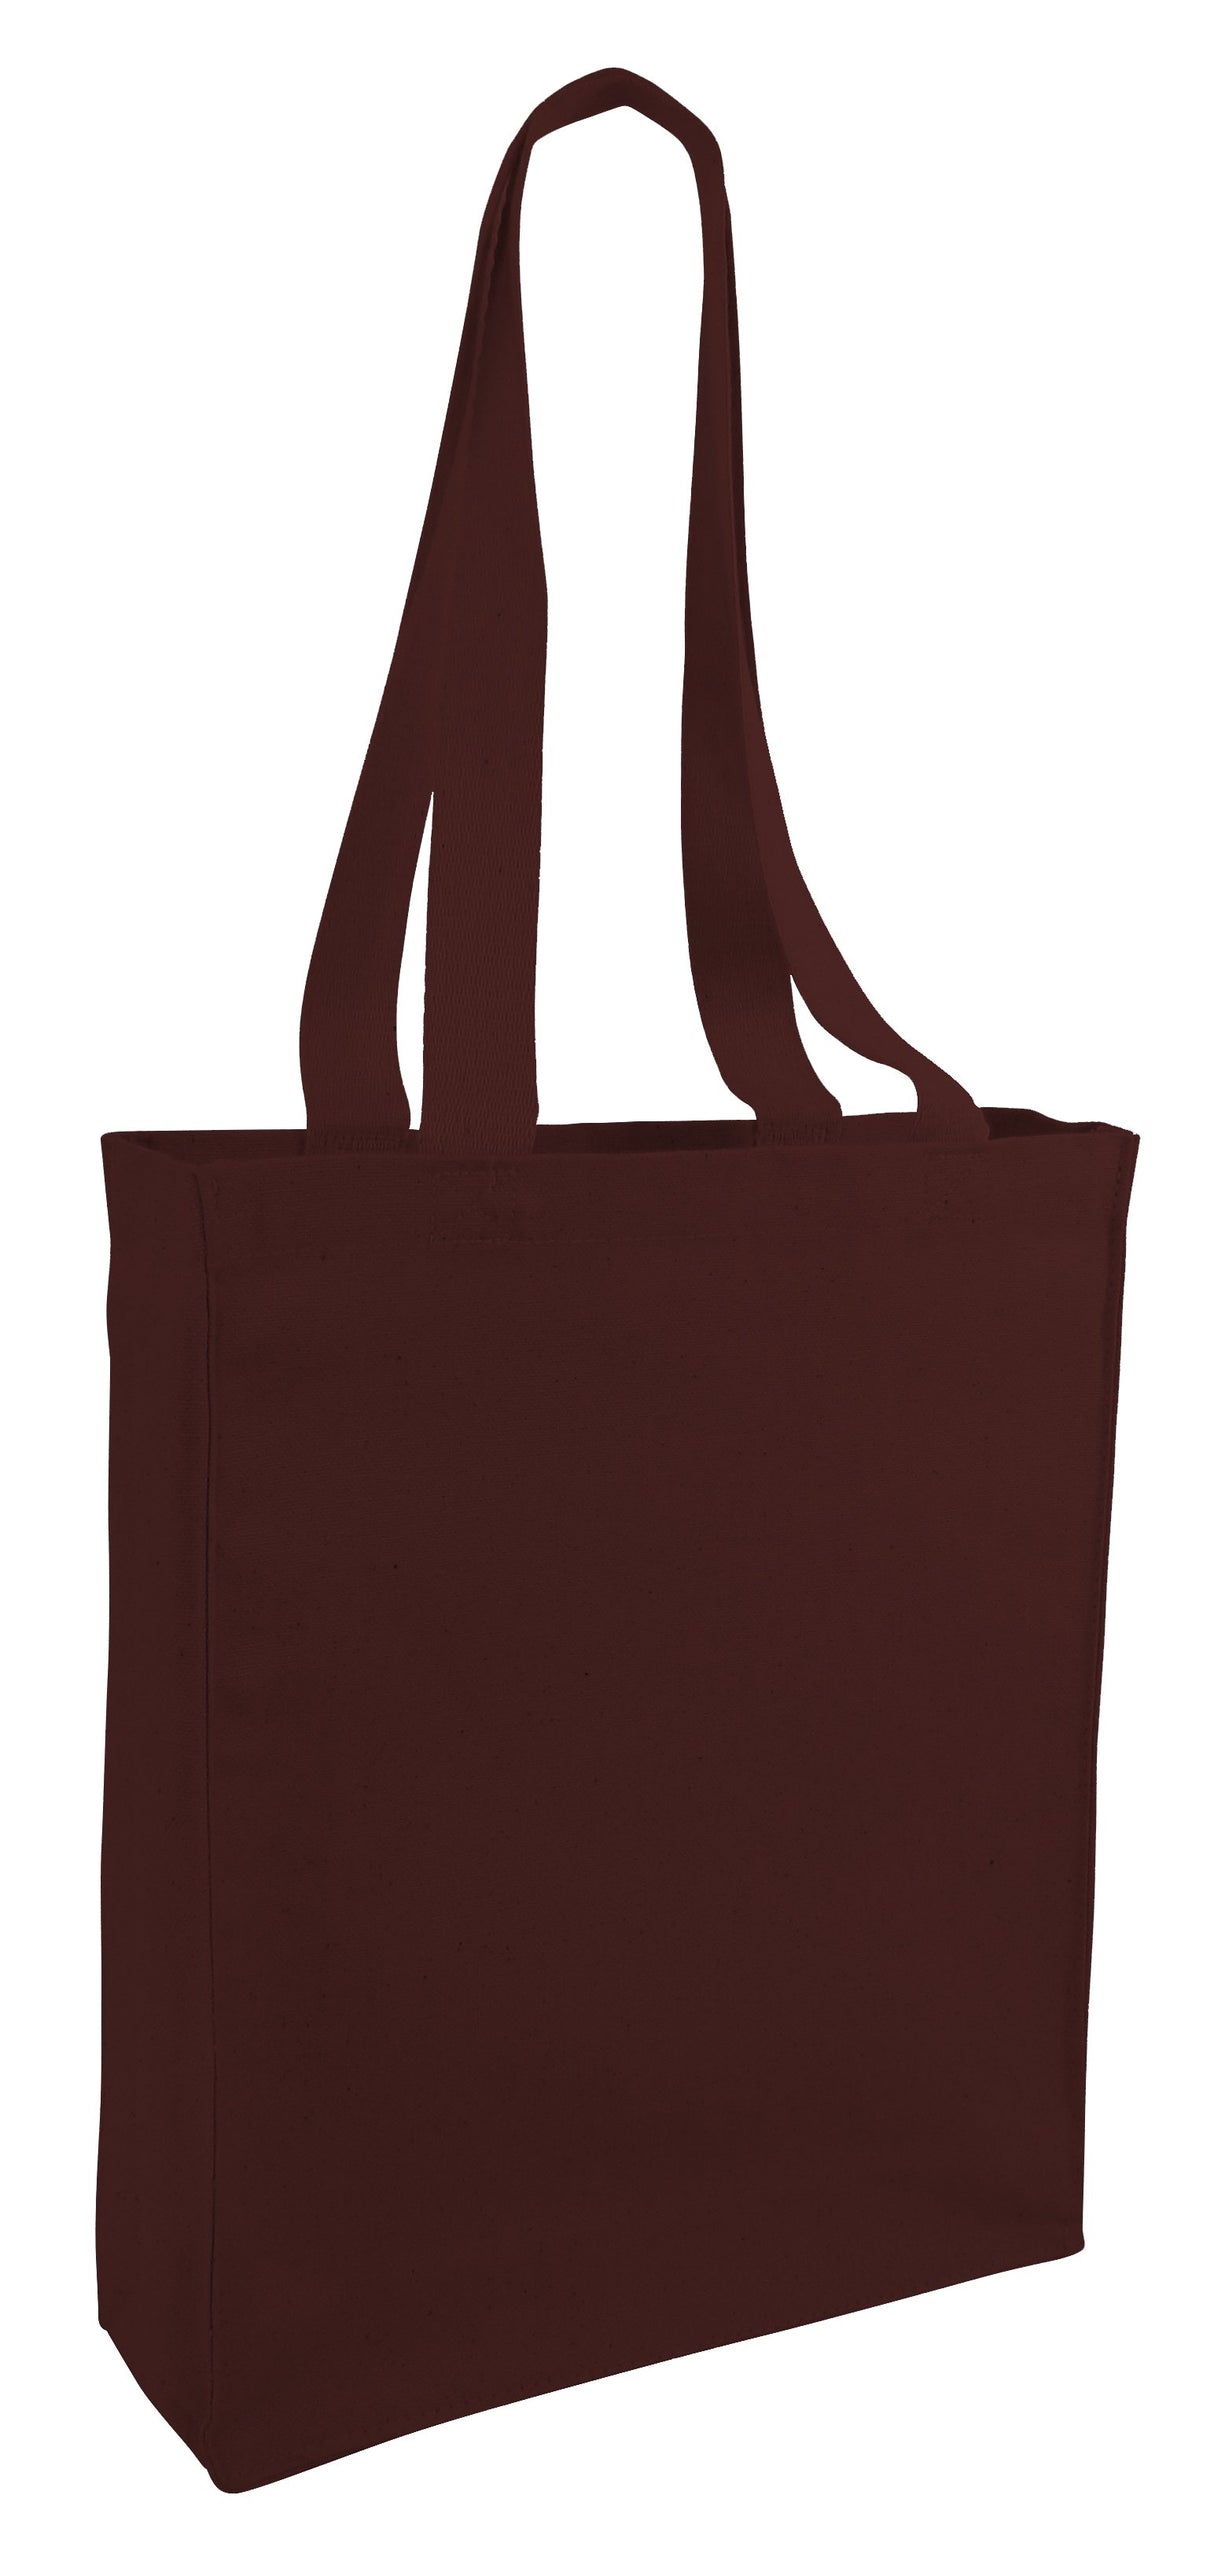 Closeout 144 ct Affordable Canvas Tote Bag / Book Bag with Gusset - By Case